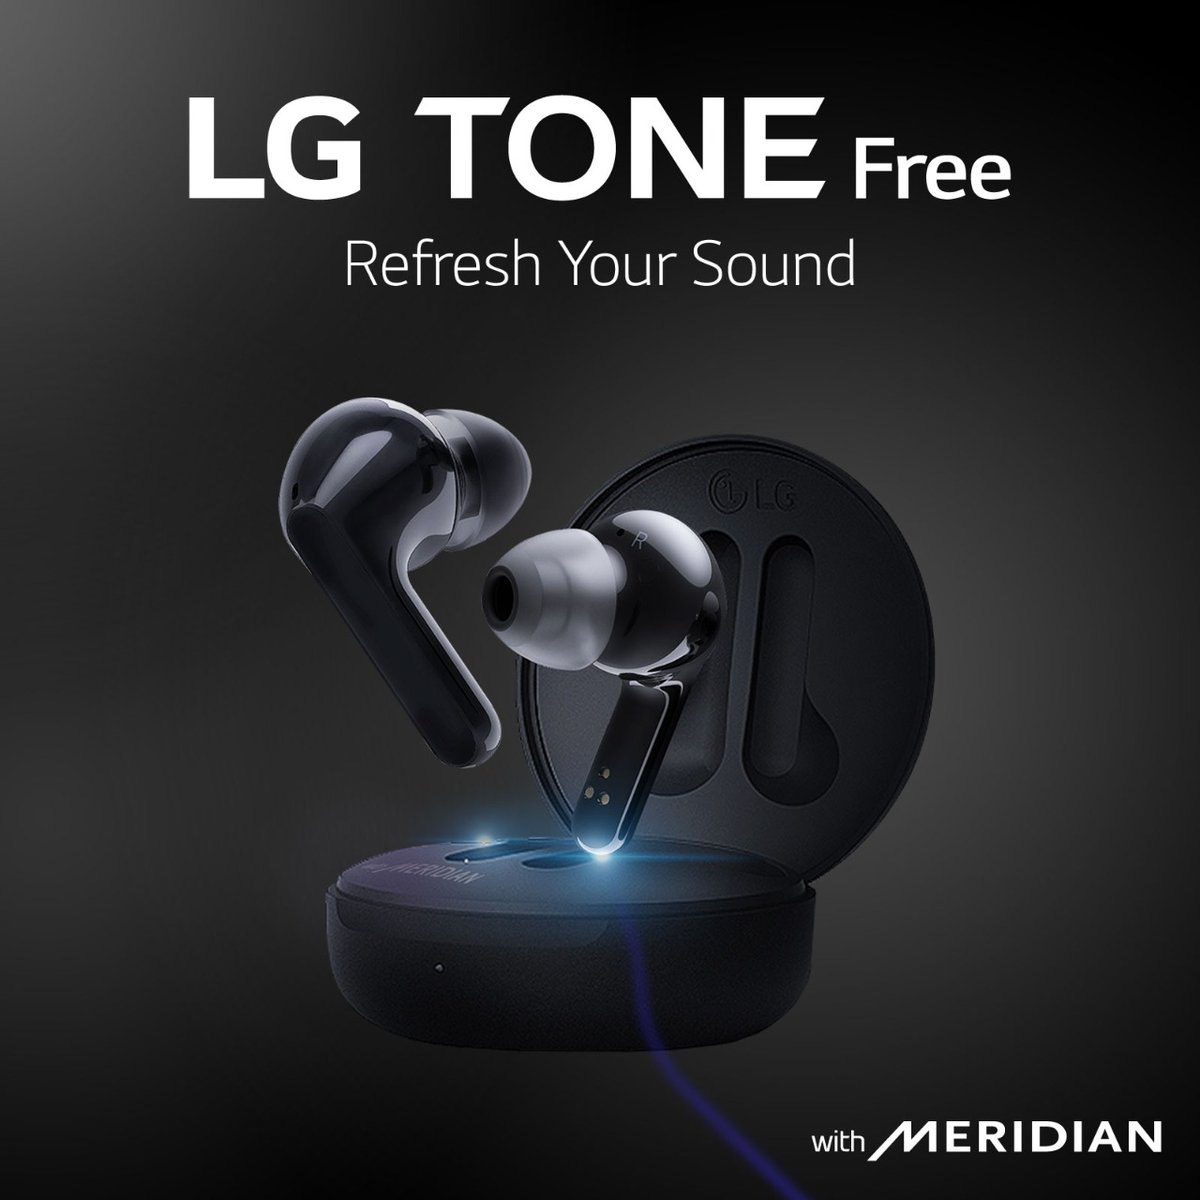 LG Tone Free earbuds offers outstanding audio experience accompanied by outstanding features. Learn more by visiting lg.com/eastafrica/aud…
#LGToneFree
#LG100Club